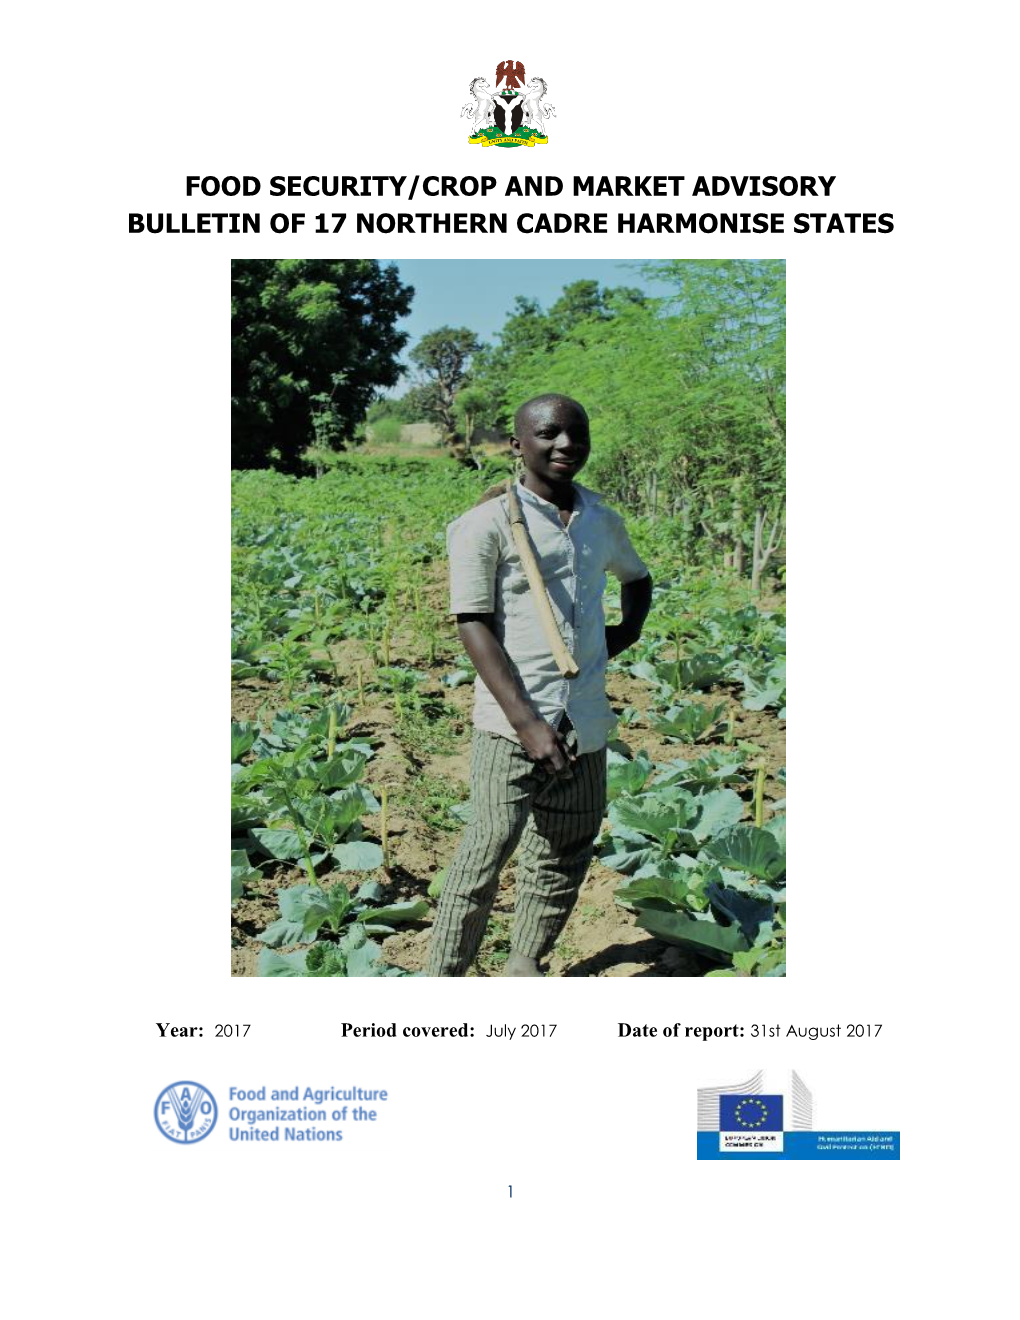 Food Security/Crop and Market Advisory Bulletin of 17 Northern Cadre Harmonise States